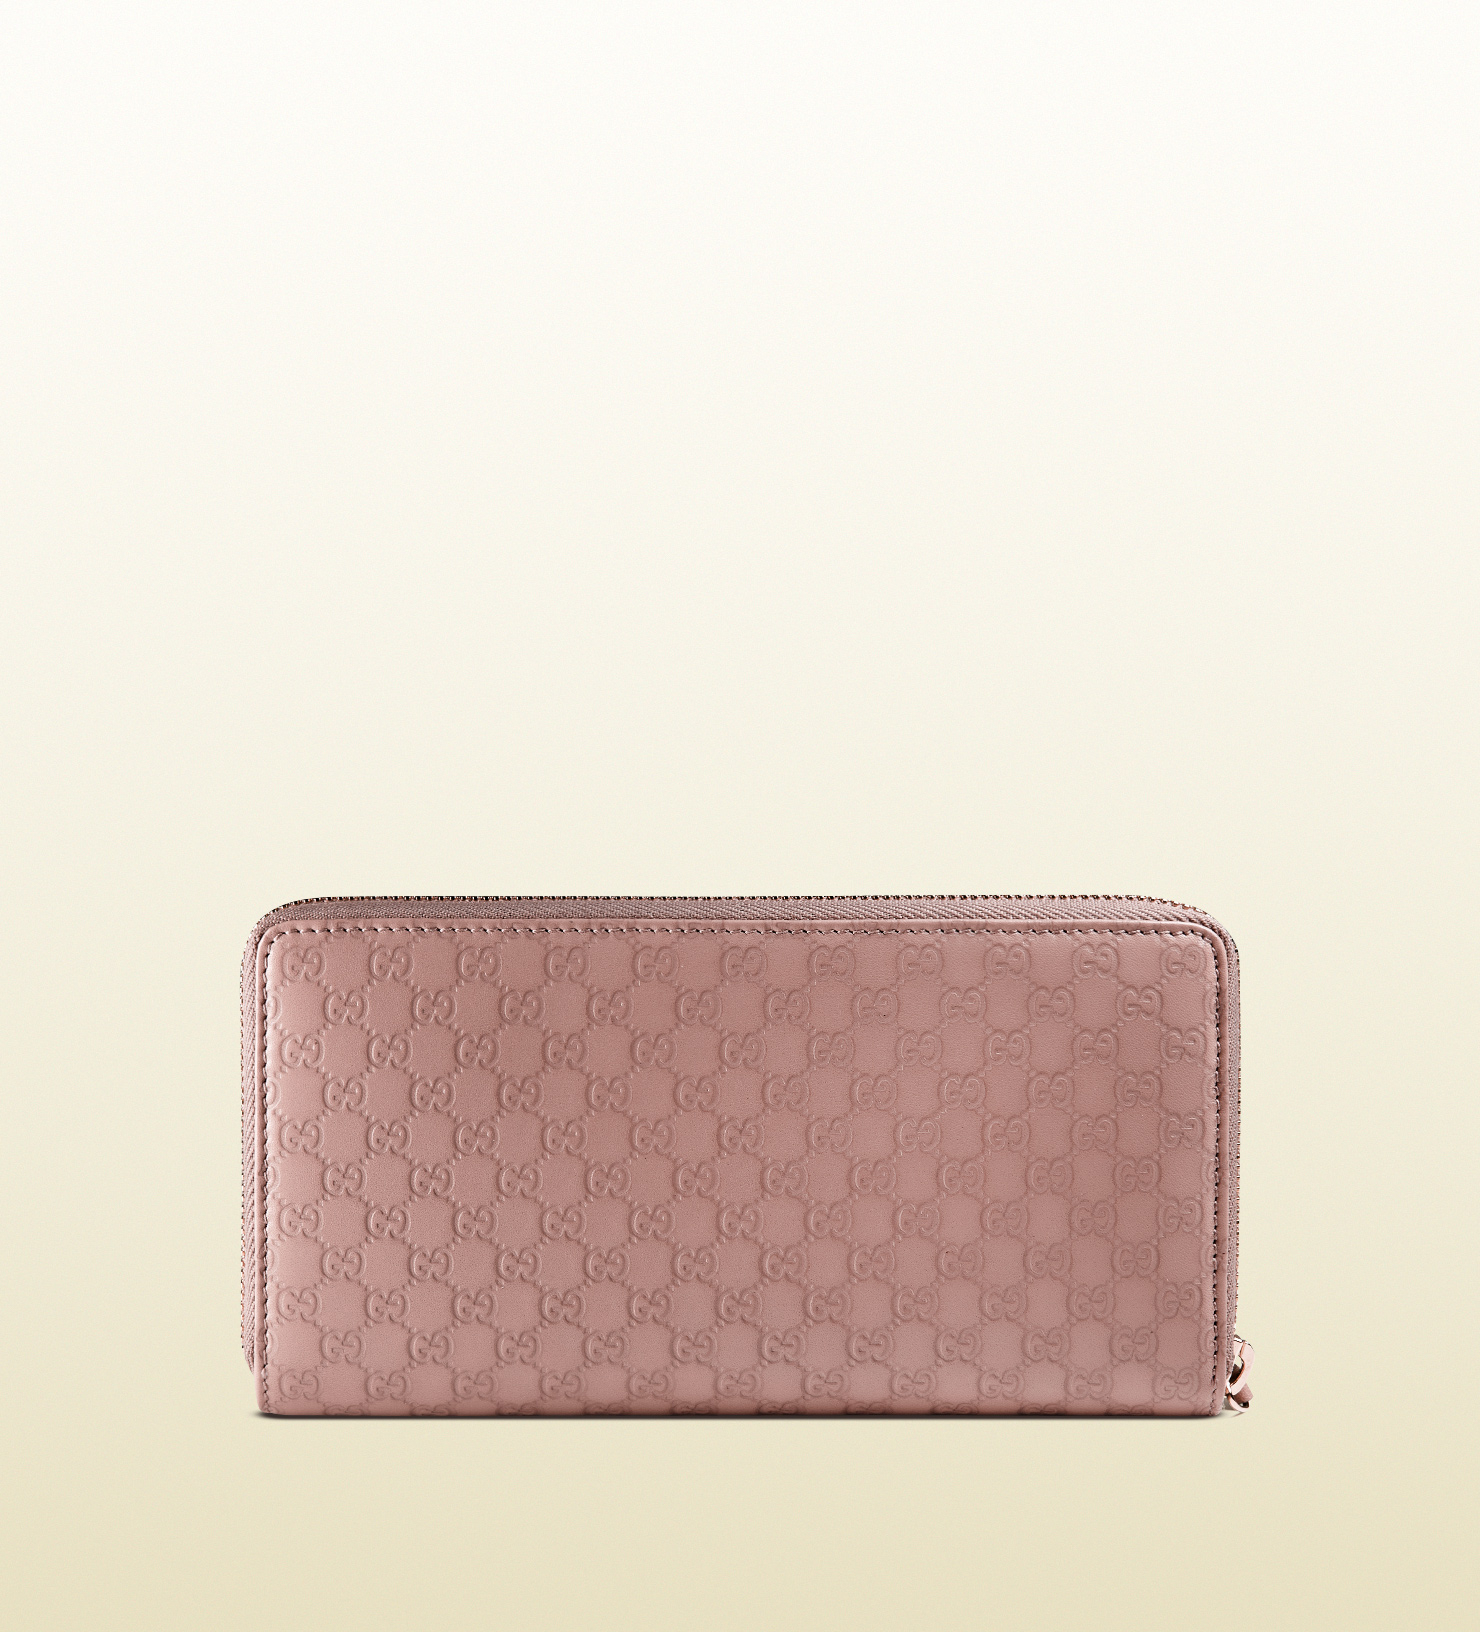 Lyst - Gucci Bow Microssima Leather Zip Around Wallet in Pink